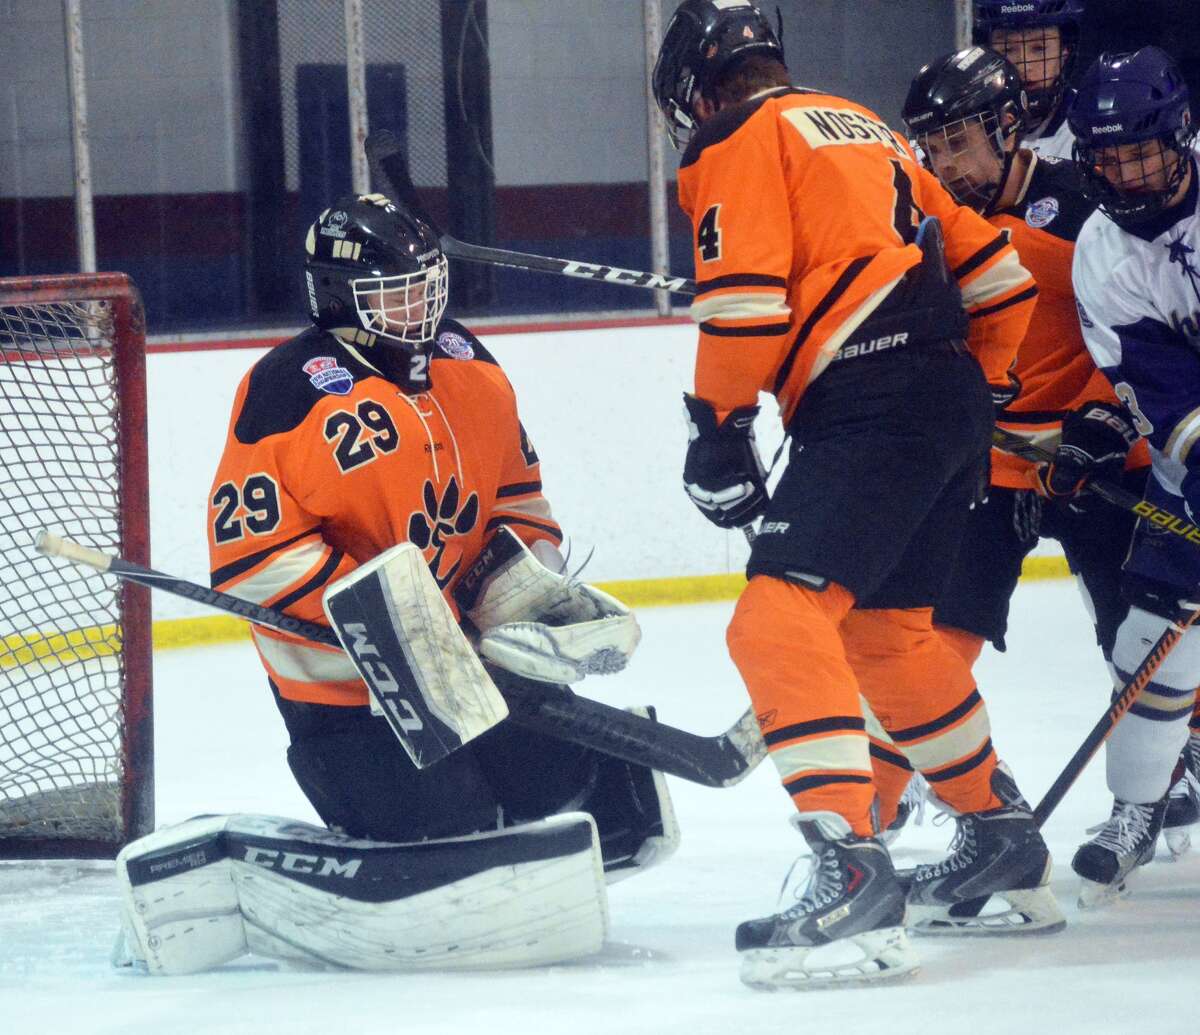 Edwardsville goalie Matt Griffin, left, hangs on to make save with defenseman Jared Nosser shielding him from CBC during the first period in Affton, Mo.